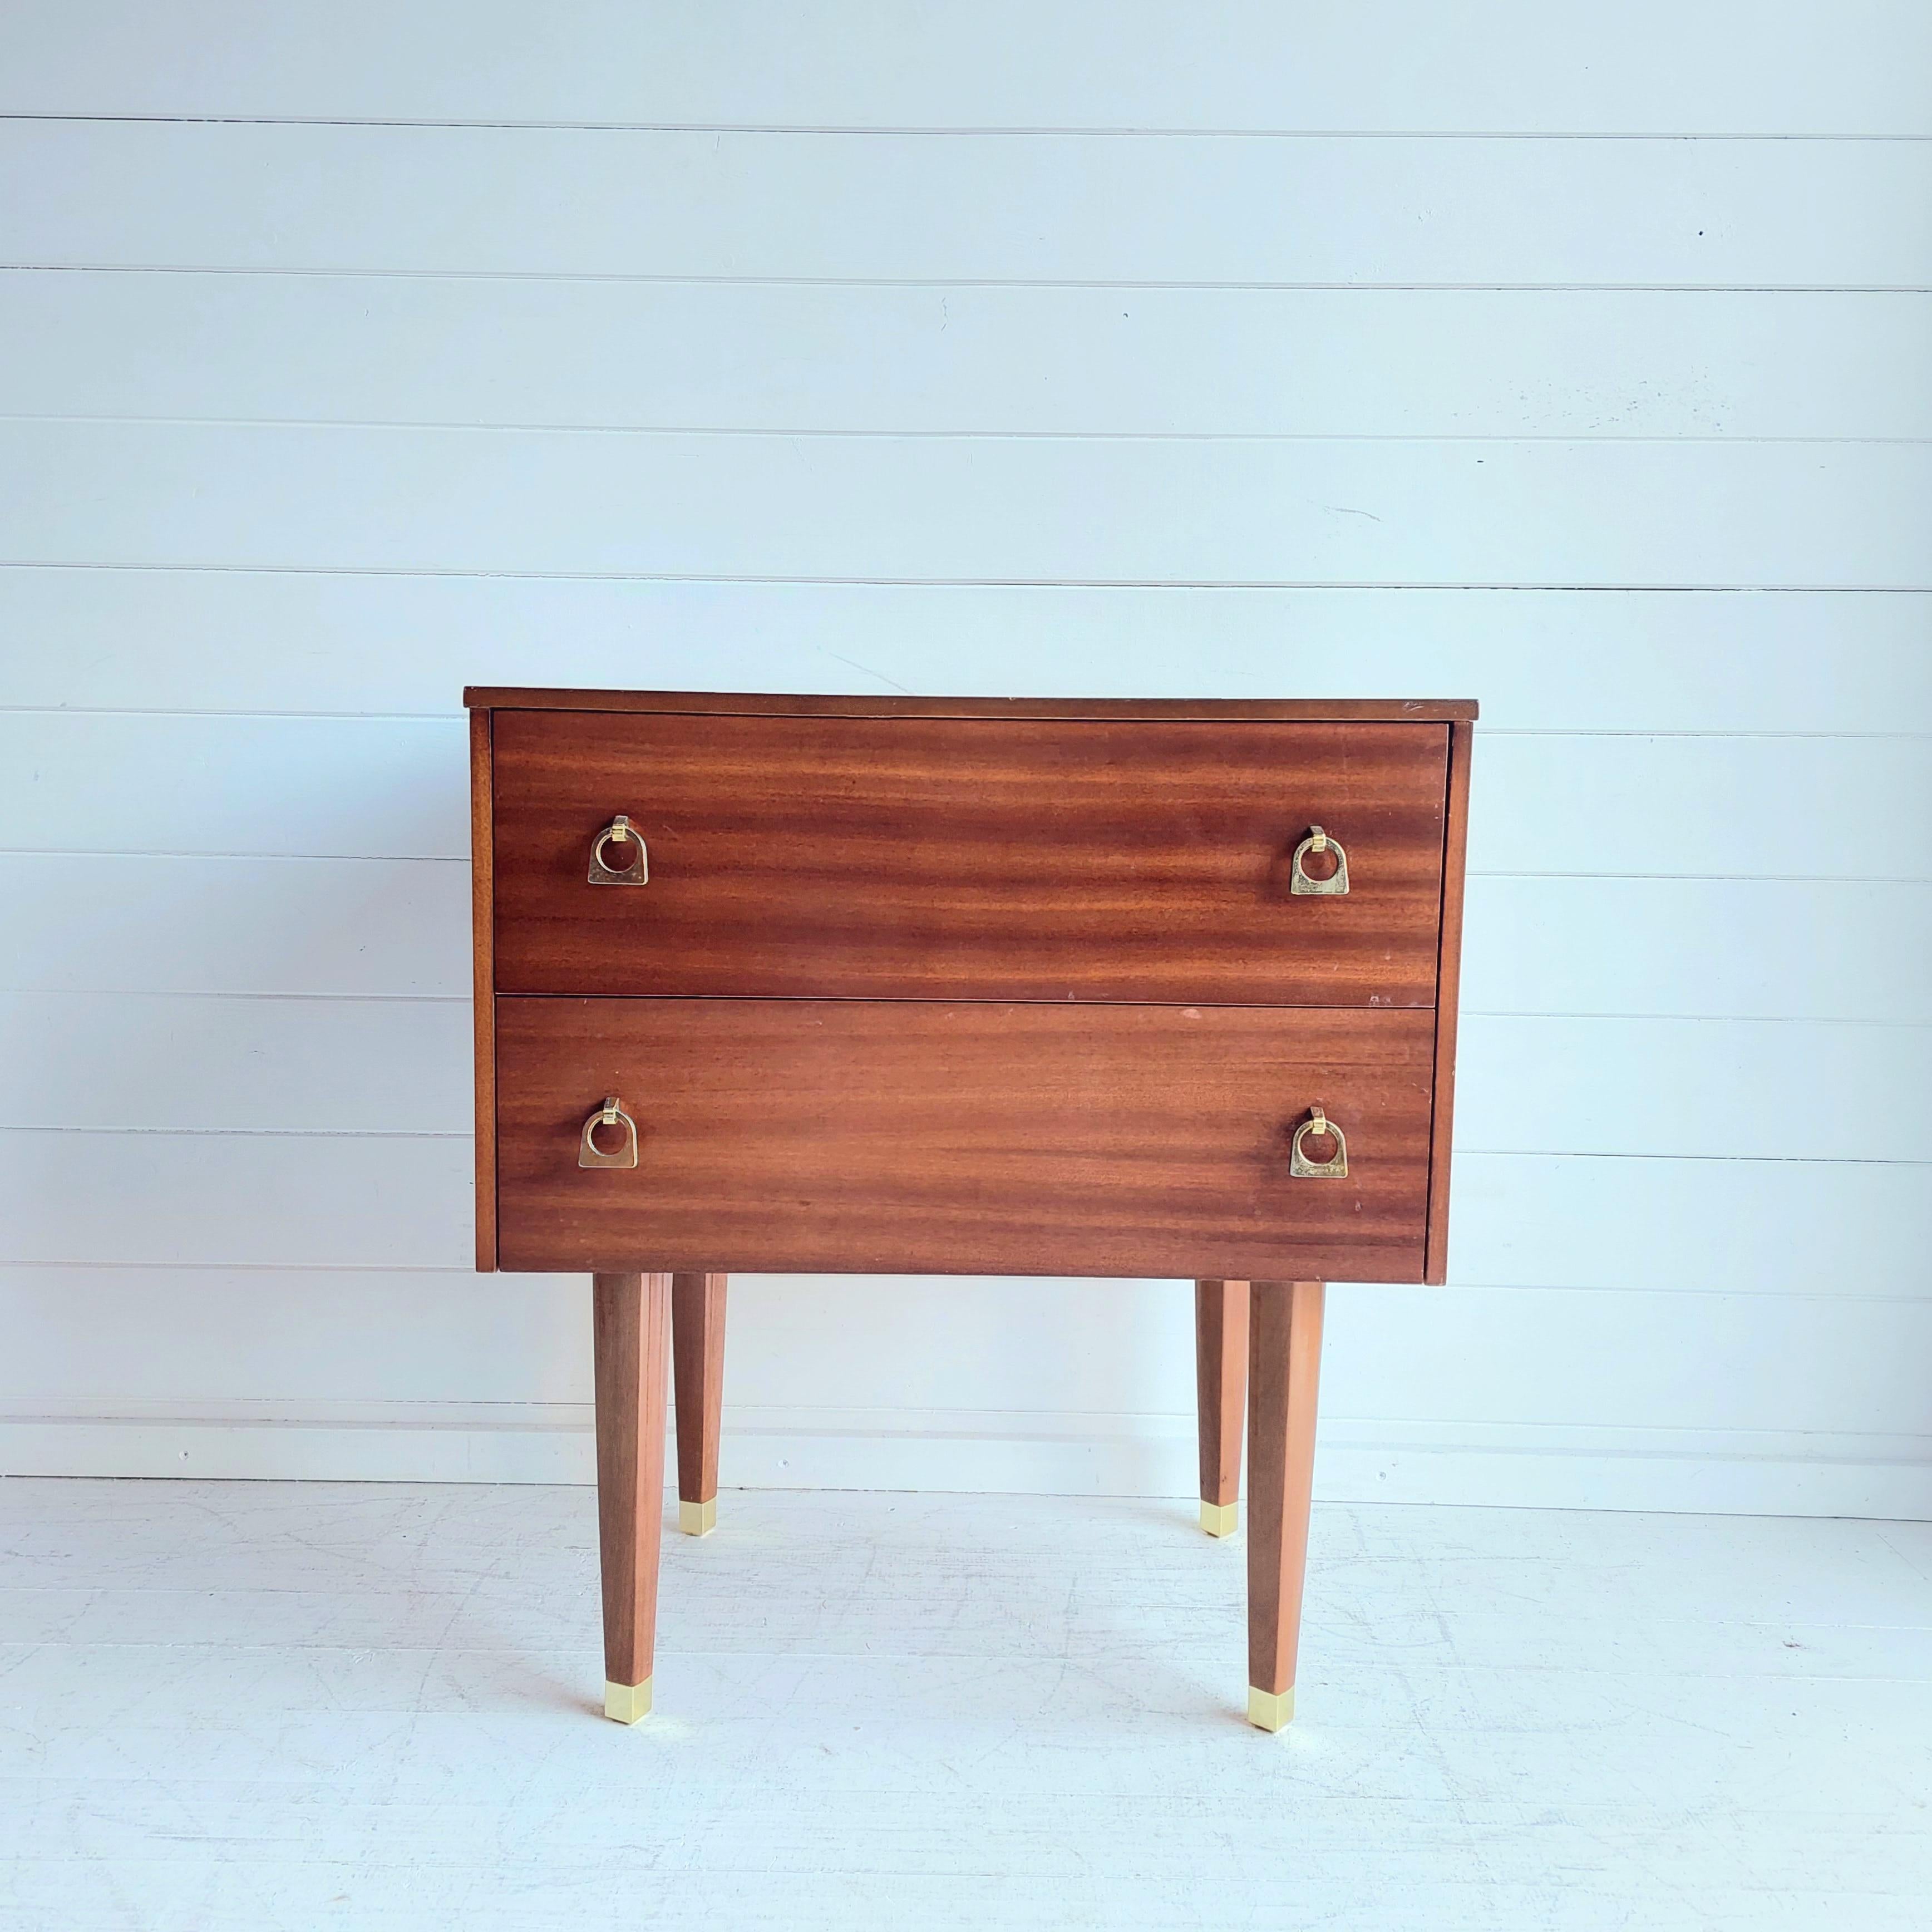 Minimalistic nightstand from the 60s era.
Original mid-century bedside table . 
This is made from a lovely wooden veneer with lovely grain and rich colour and with 2 fitted drawers. 
The drawers have dovetail construction. 
Vintage mid-century